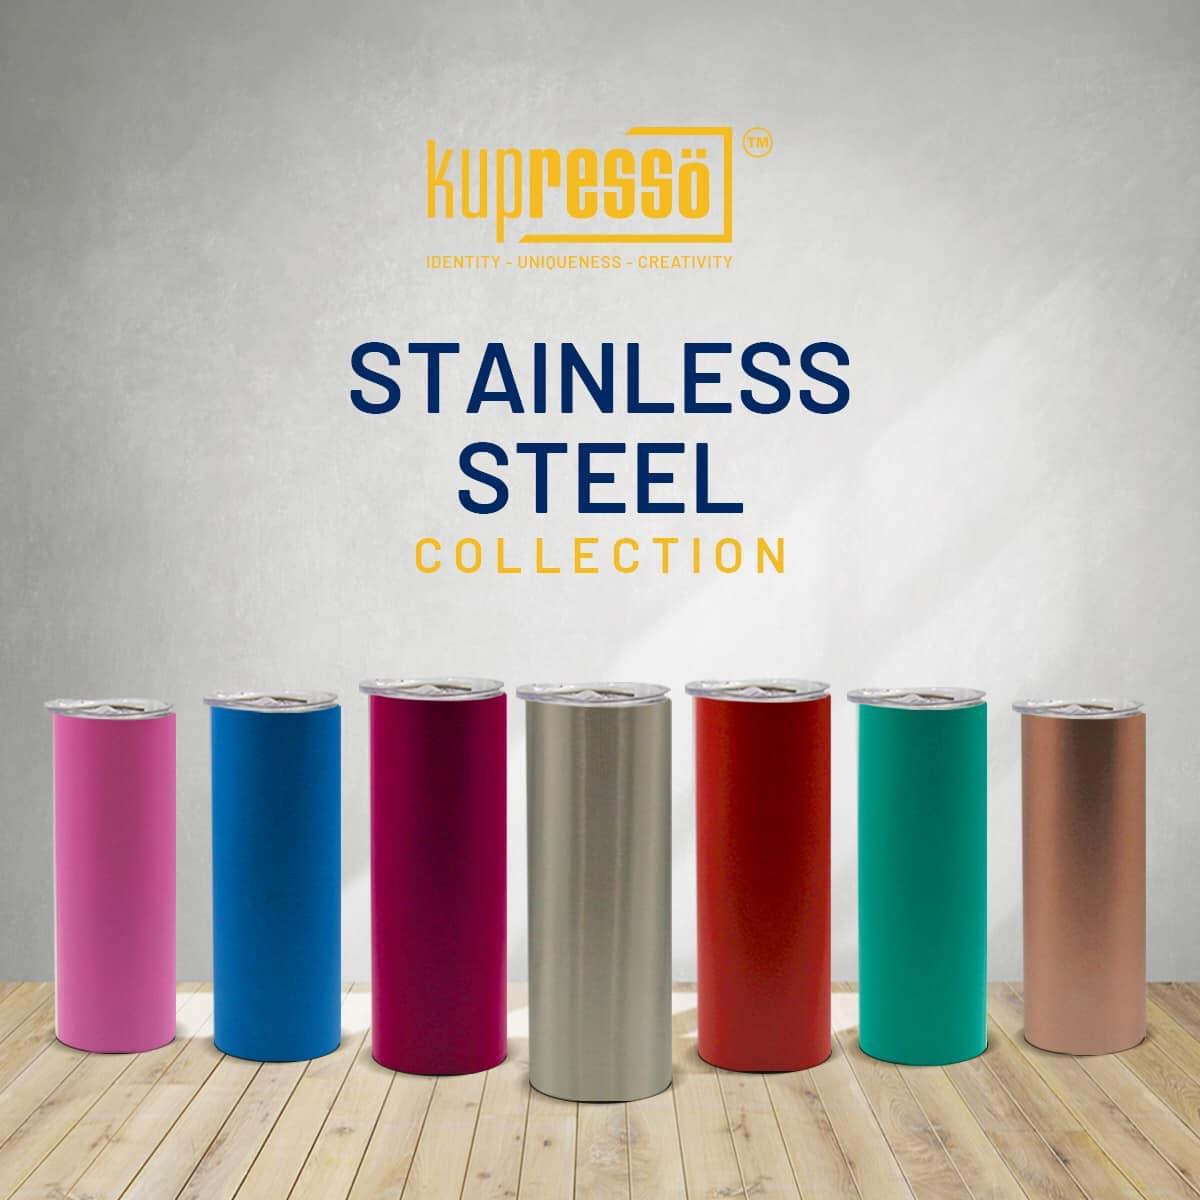 Sipping in Style: My Journey with Kupresso's Stainless Steel Tumblers